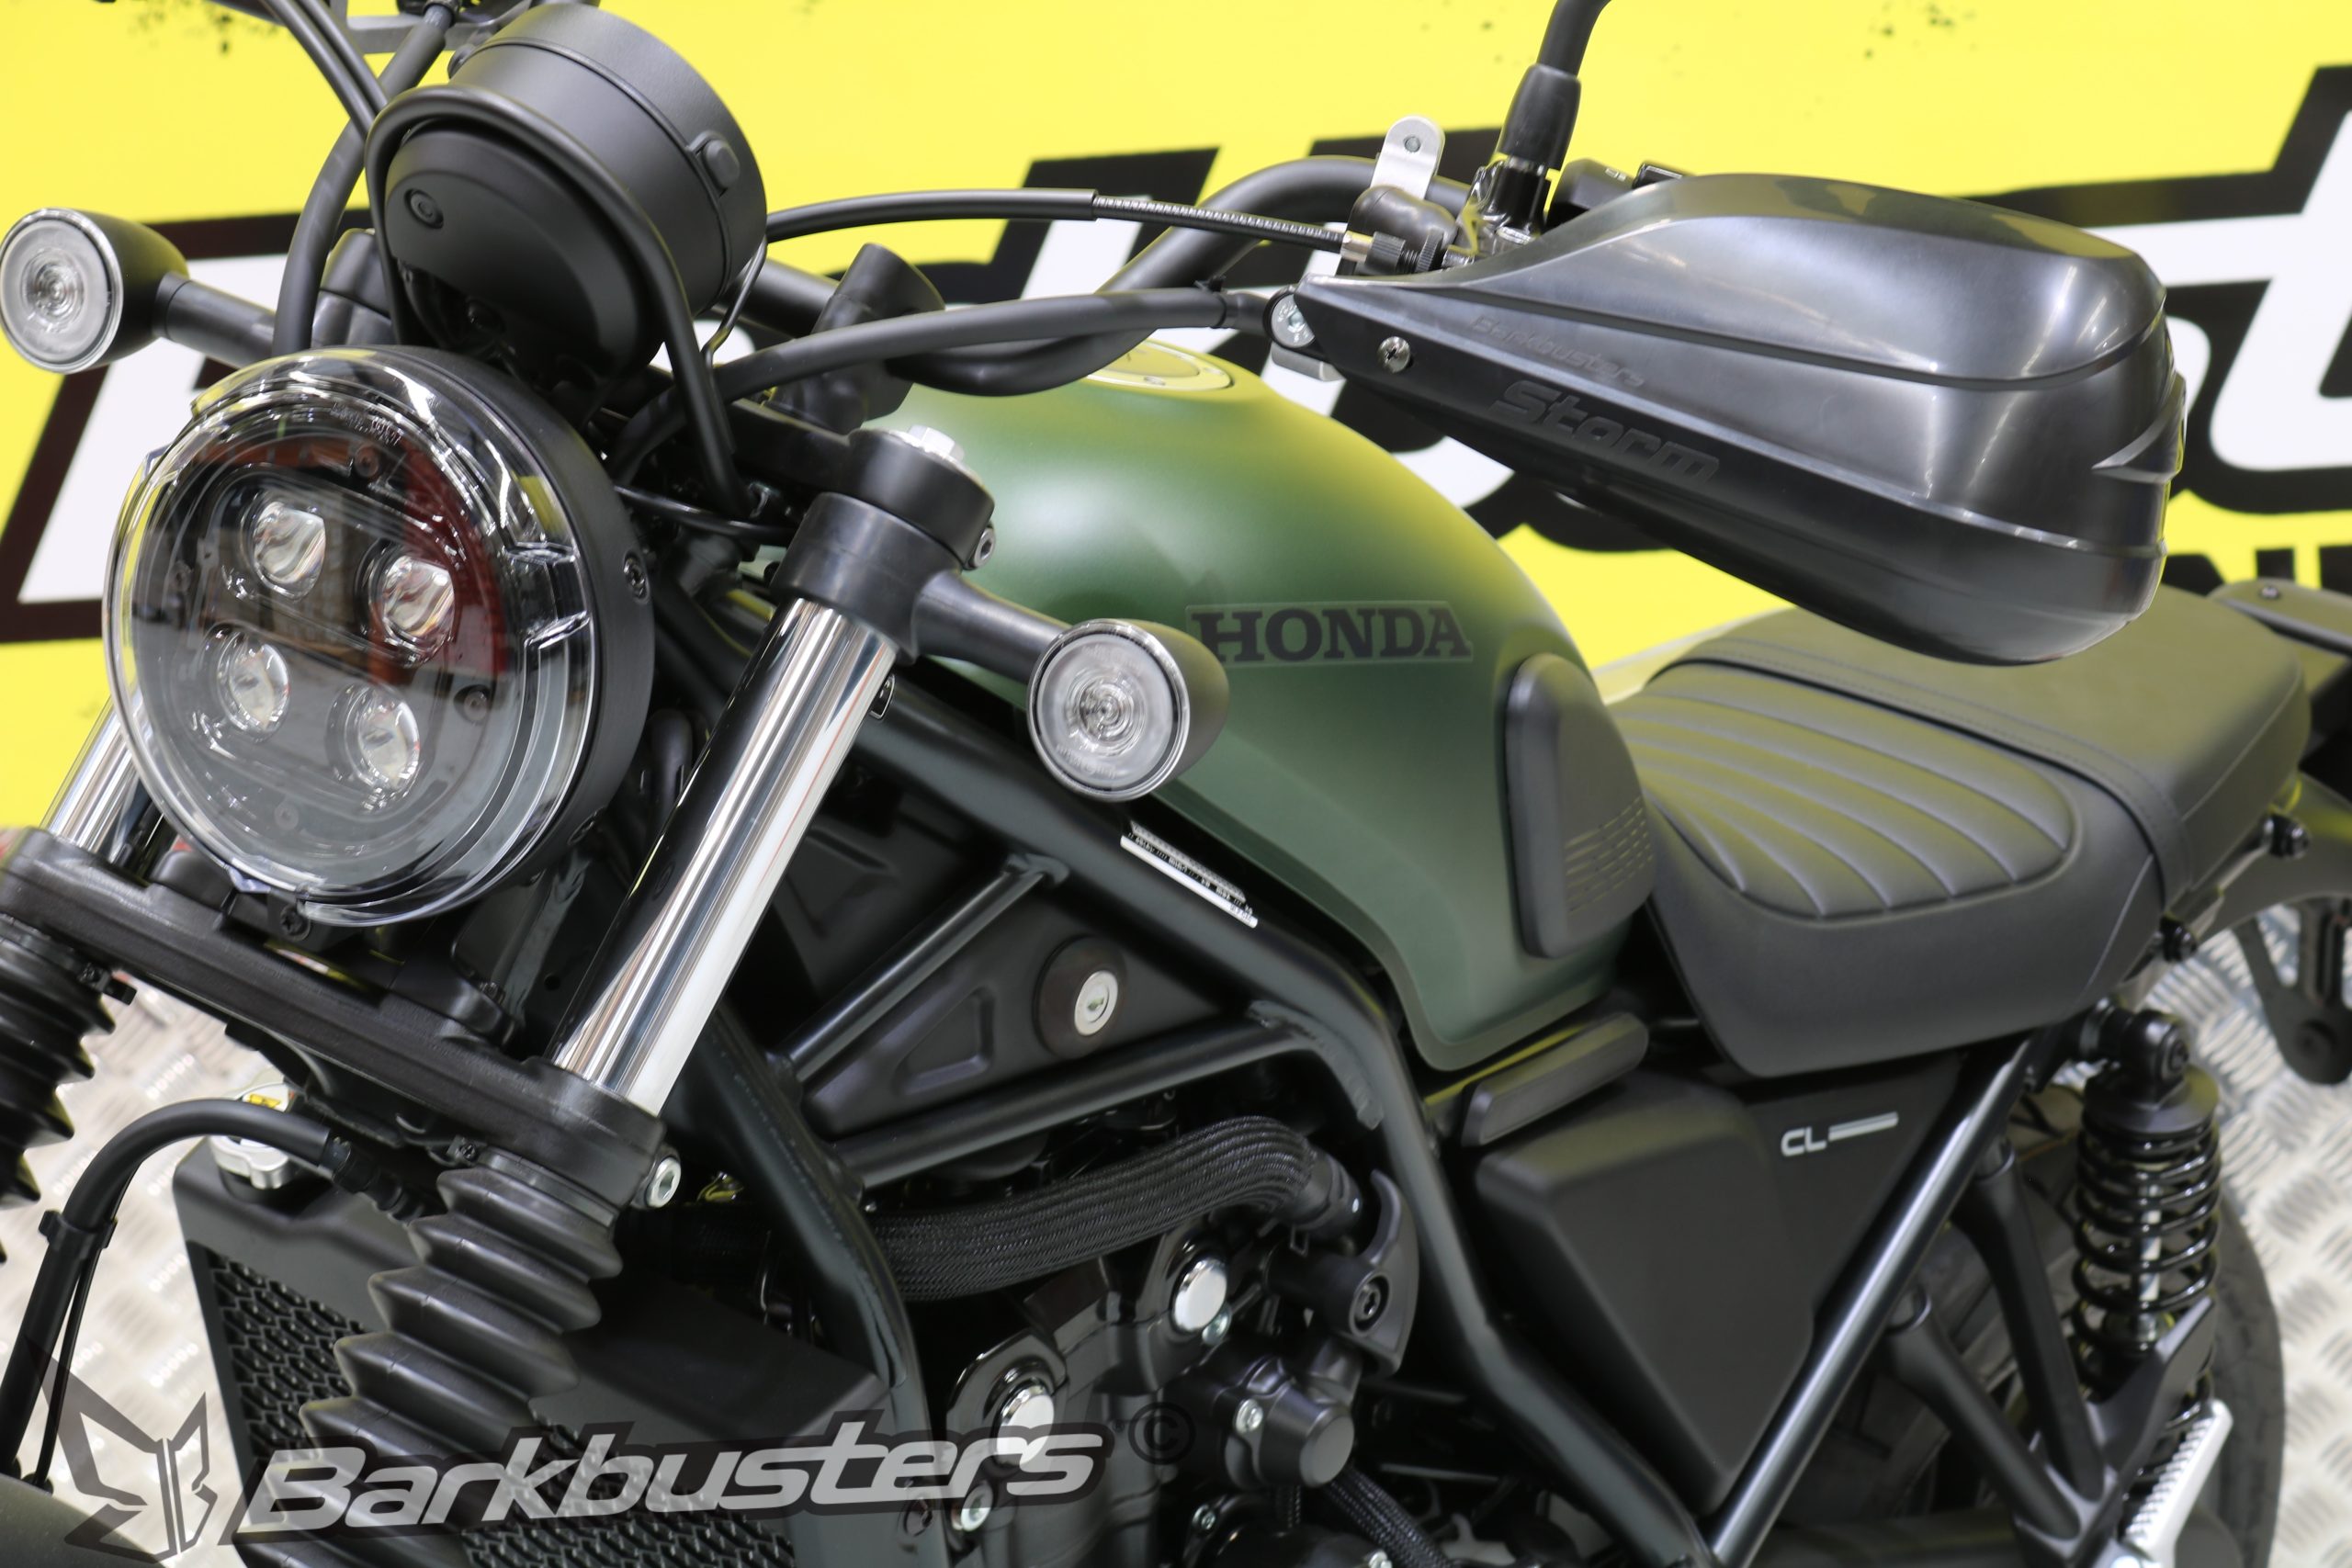 BARKBUSTERS Handguard Hardware Kit (Code: BHG-110) fitted to HONDA CL500 with STORM guards 